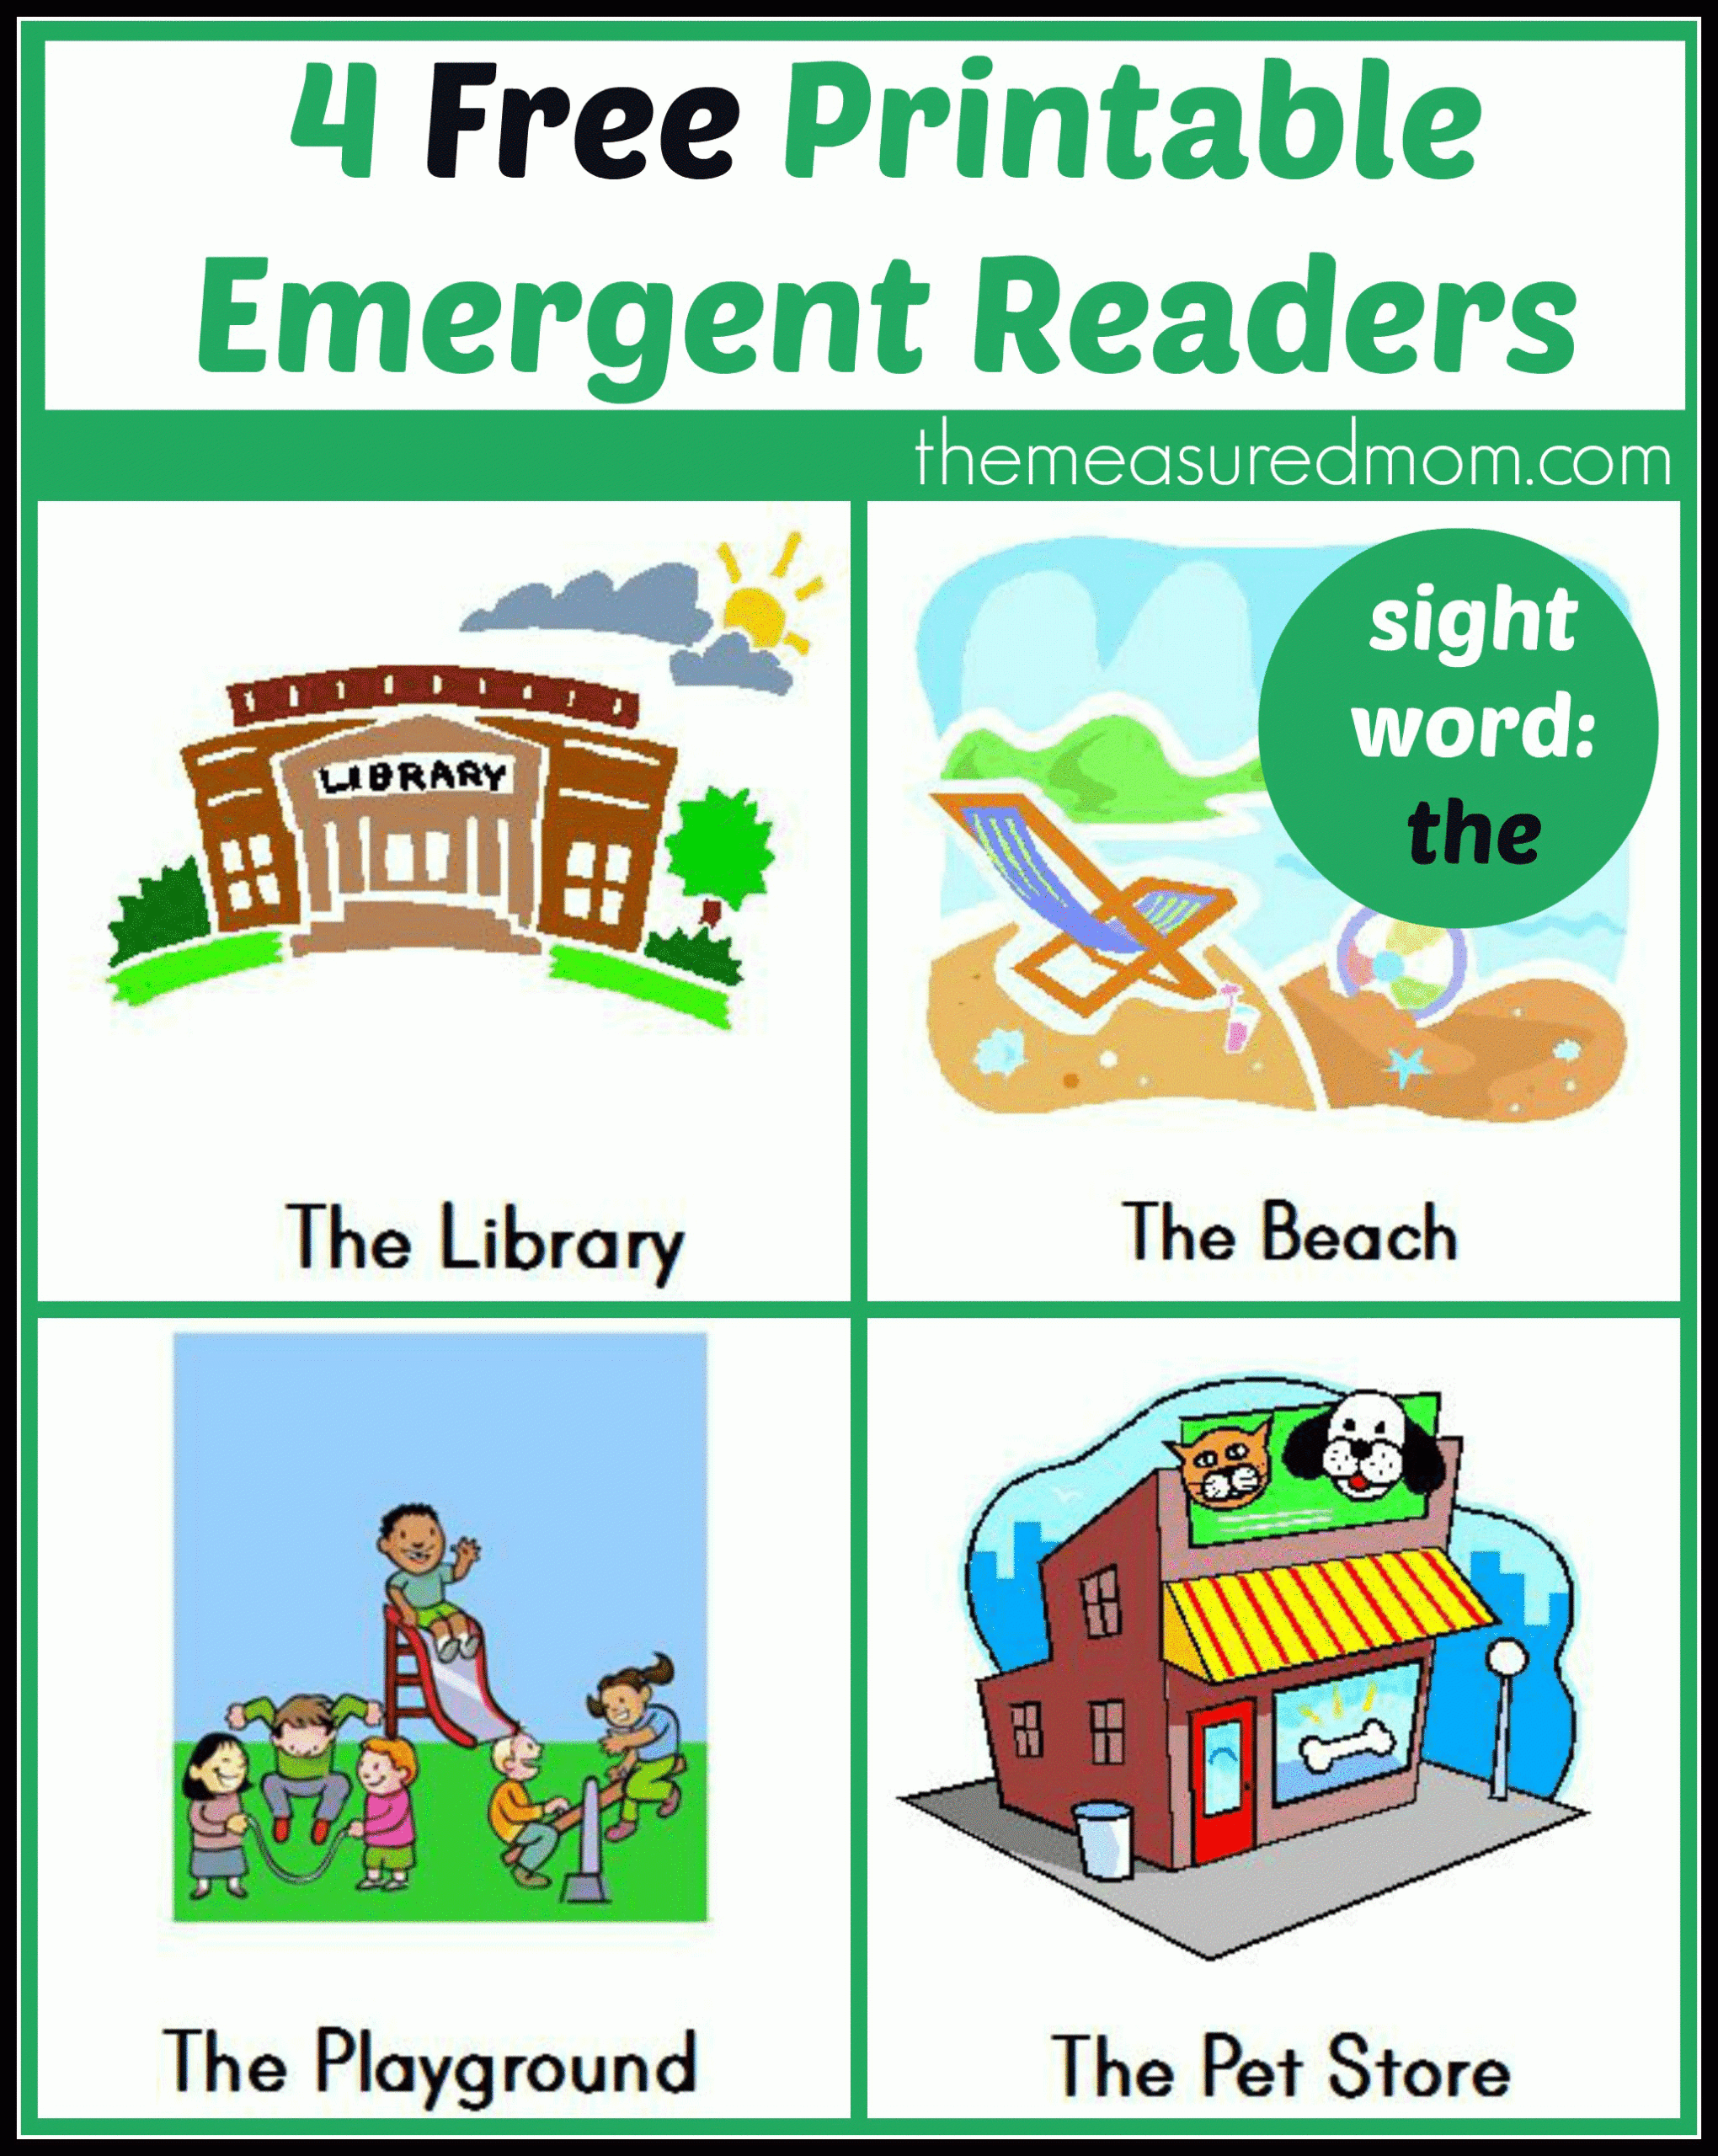 Free Printable Emergent Readers Sight Word the The Measured Mom